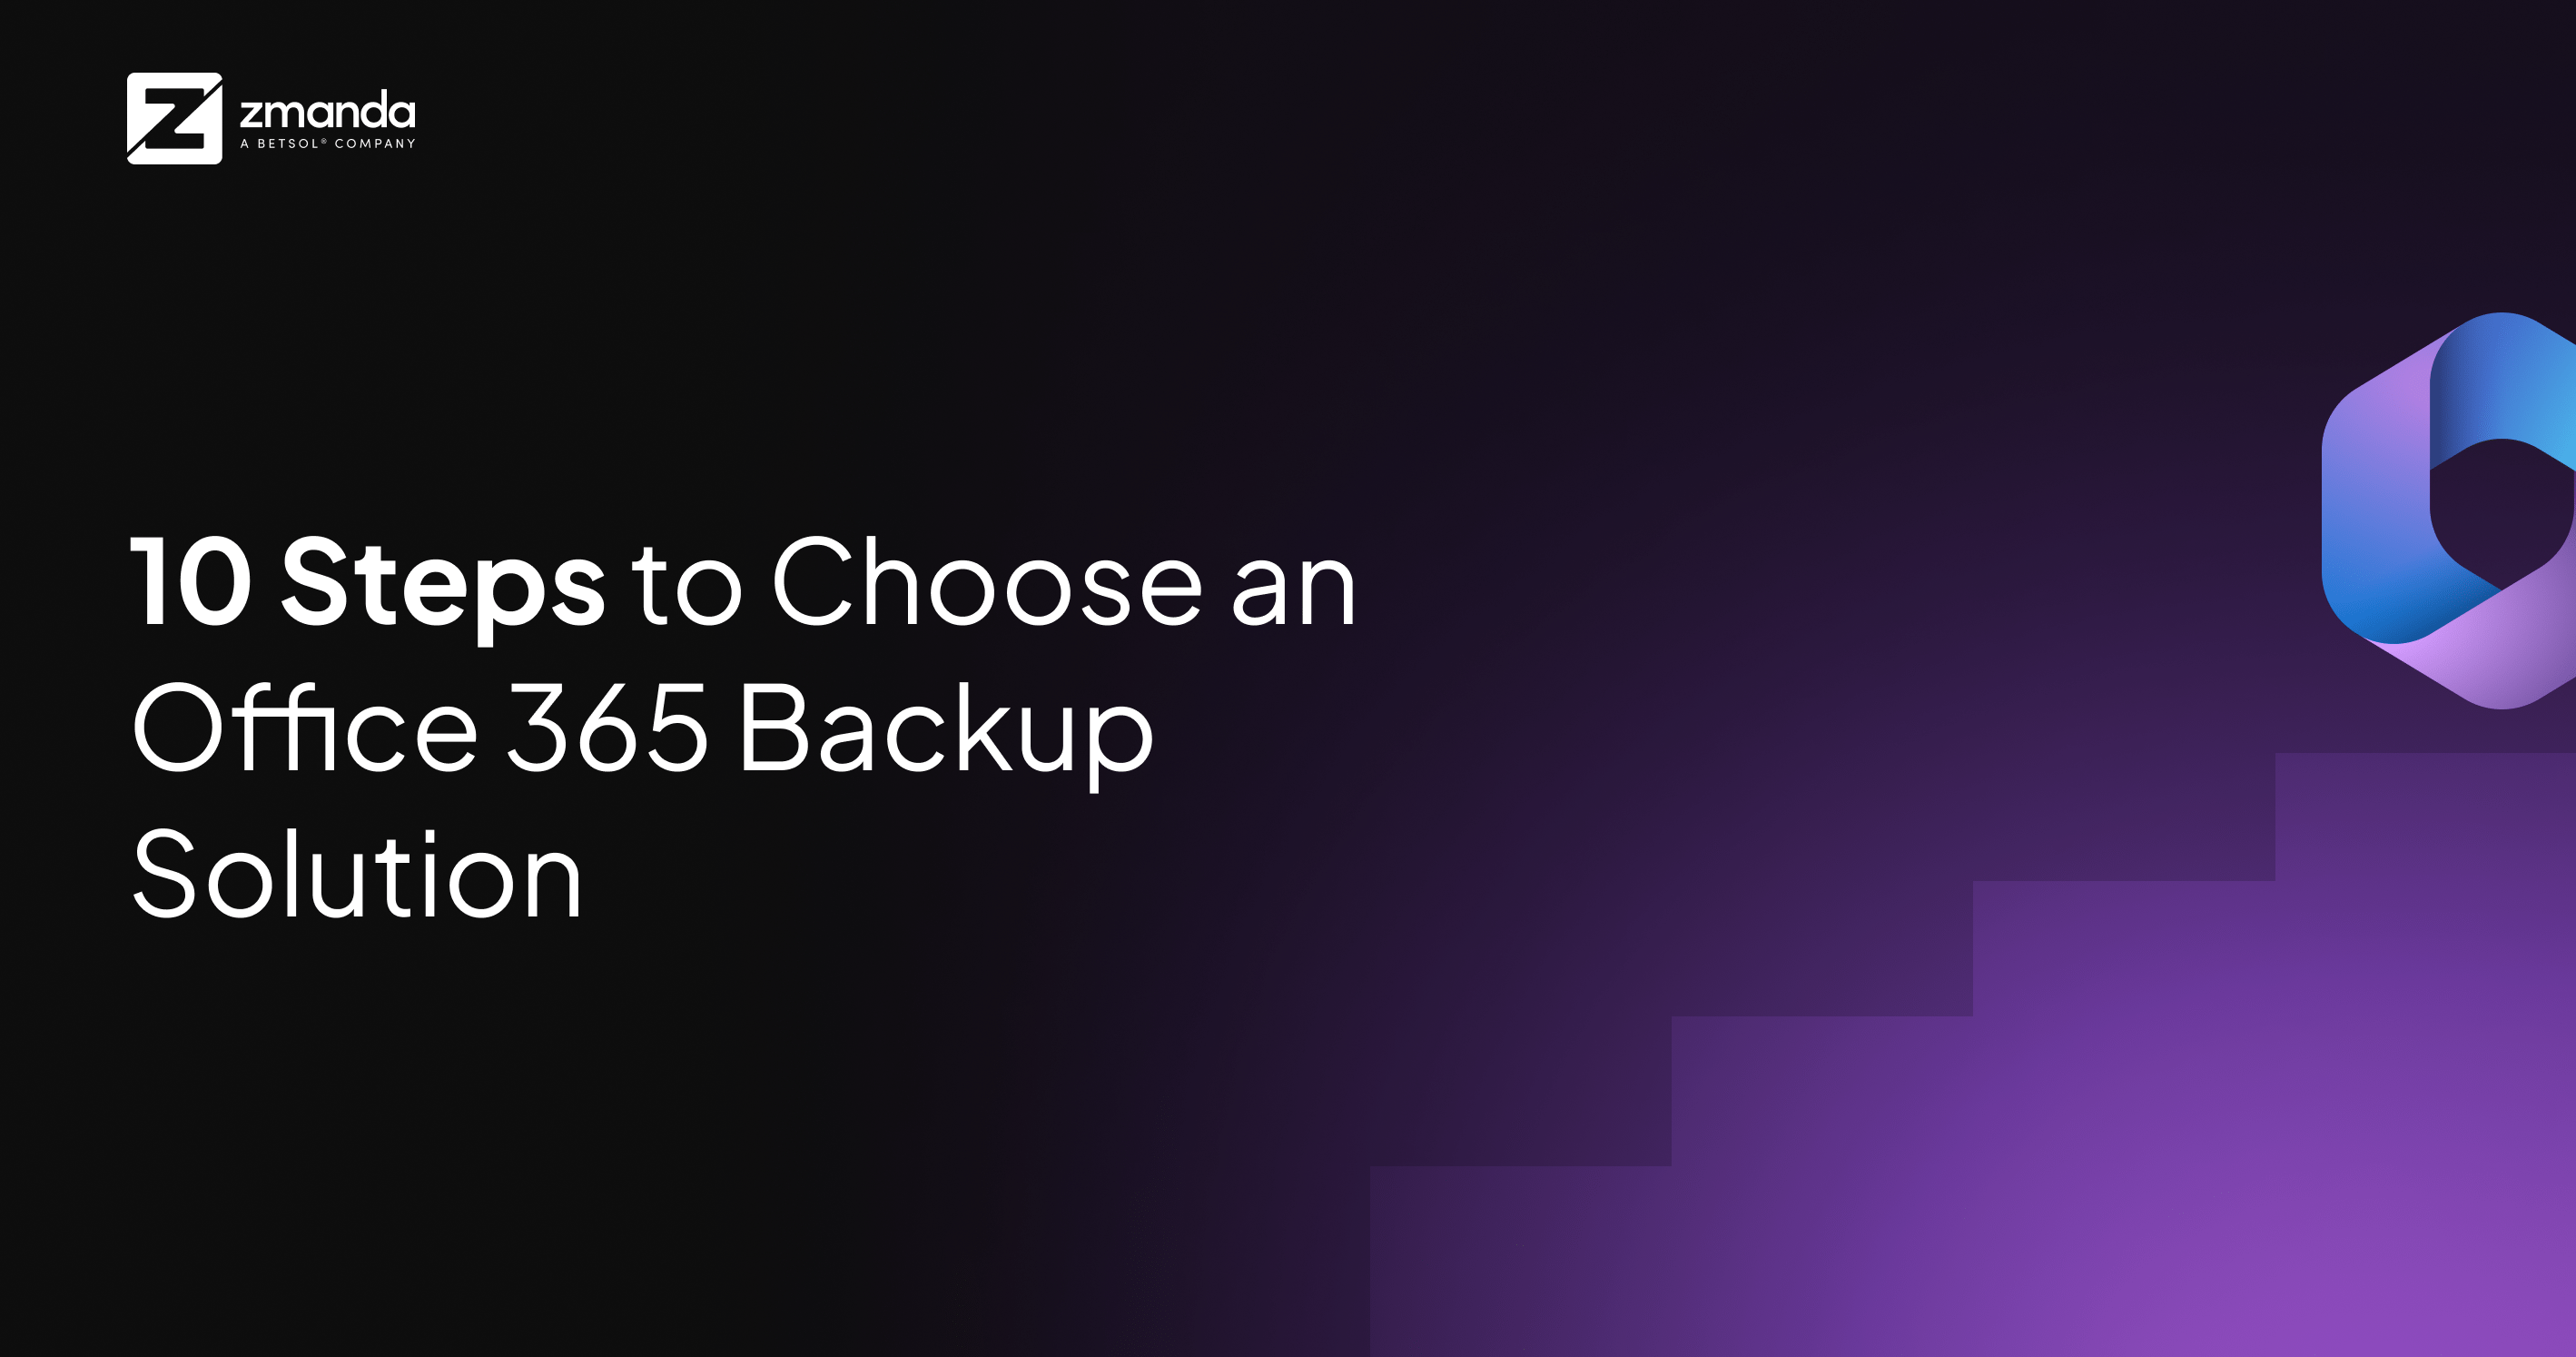 an image that says, 10 steps to choosing an office 365 backup solution with a infographic of steps